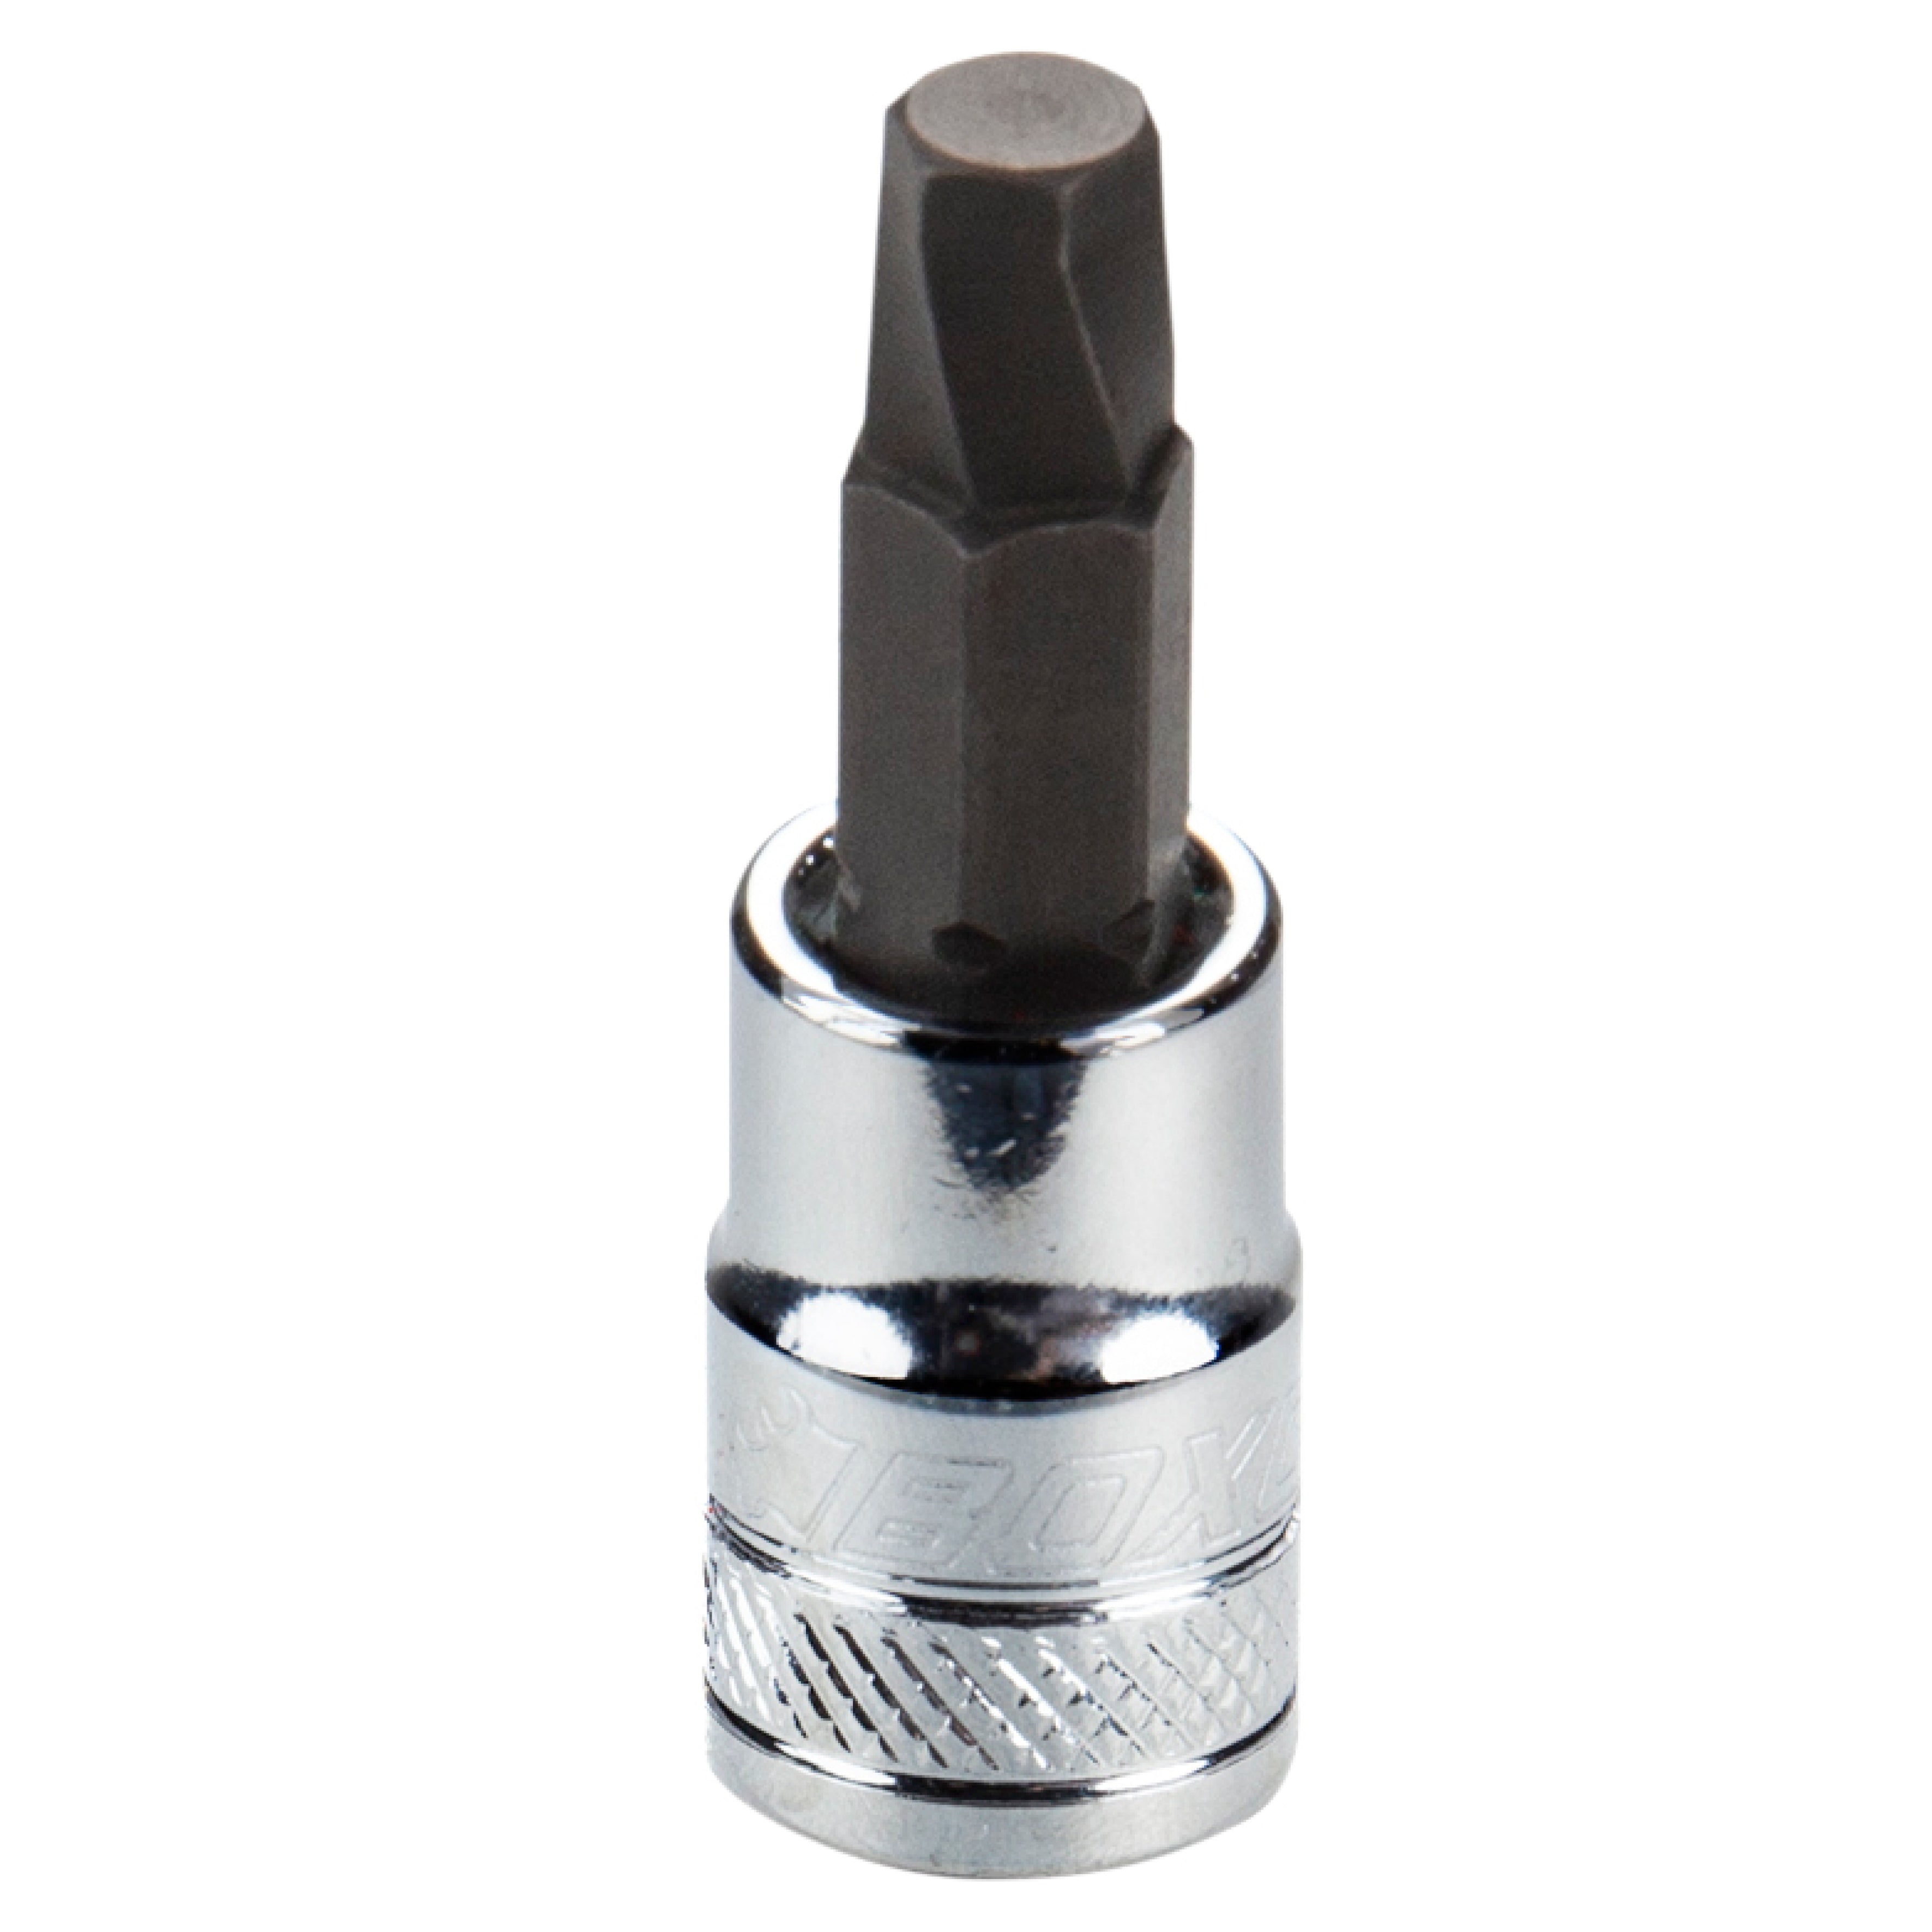 BOXO 1/4" Hex Extractor Bit Sockets - Sizes H2 to H6